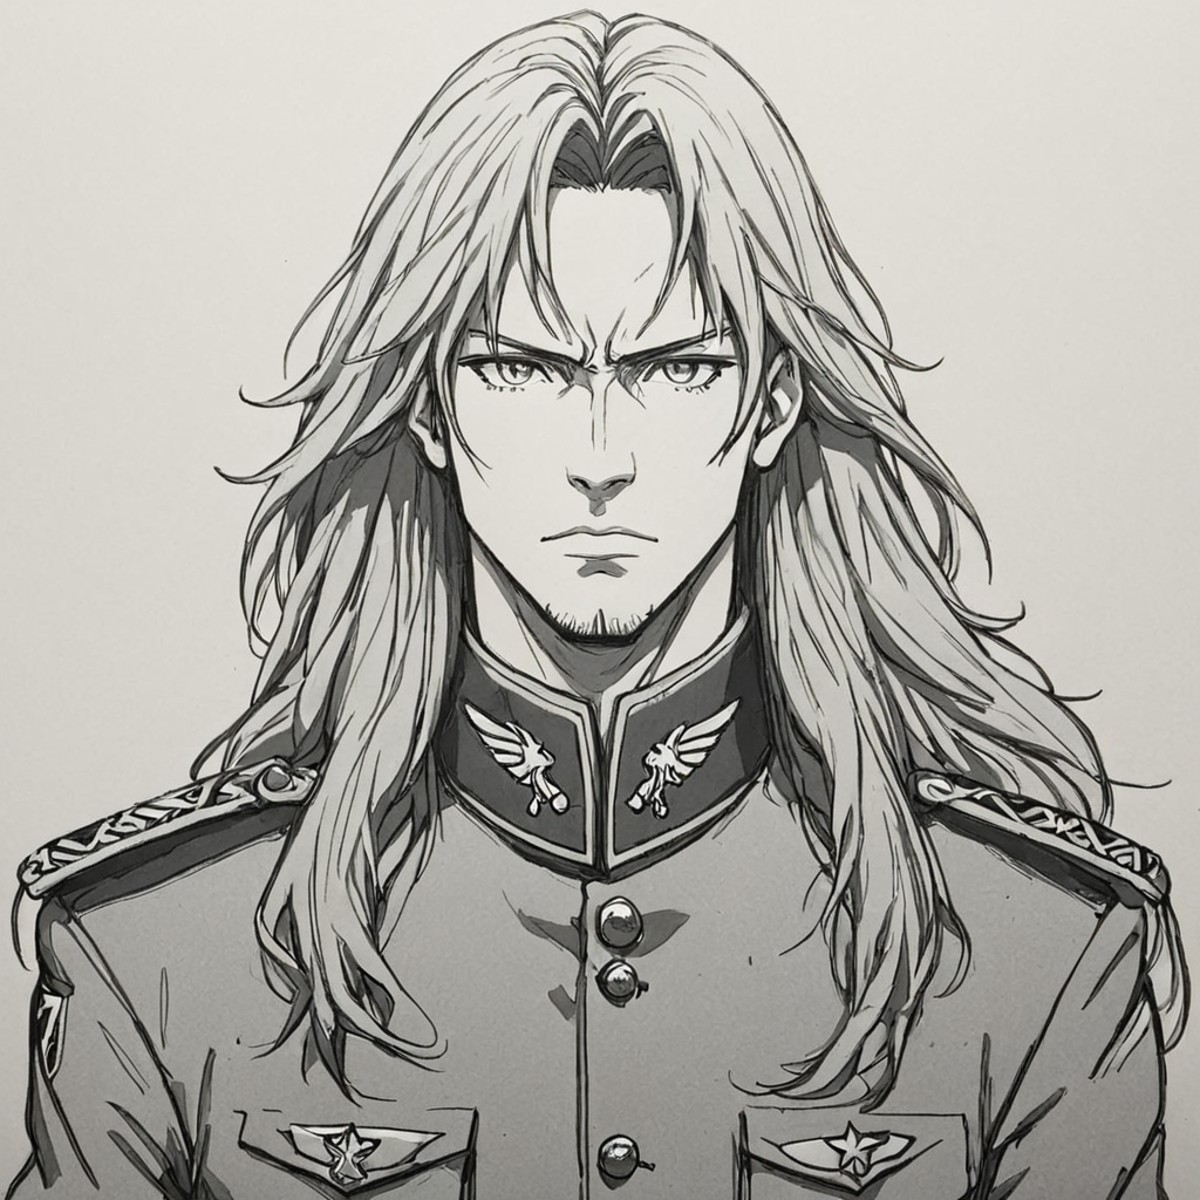 pixlineart, sketch portrait of anime man with long hair, wearing military outfit